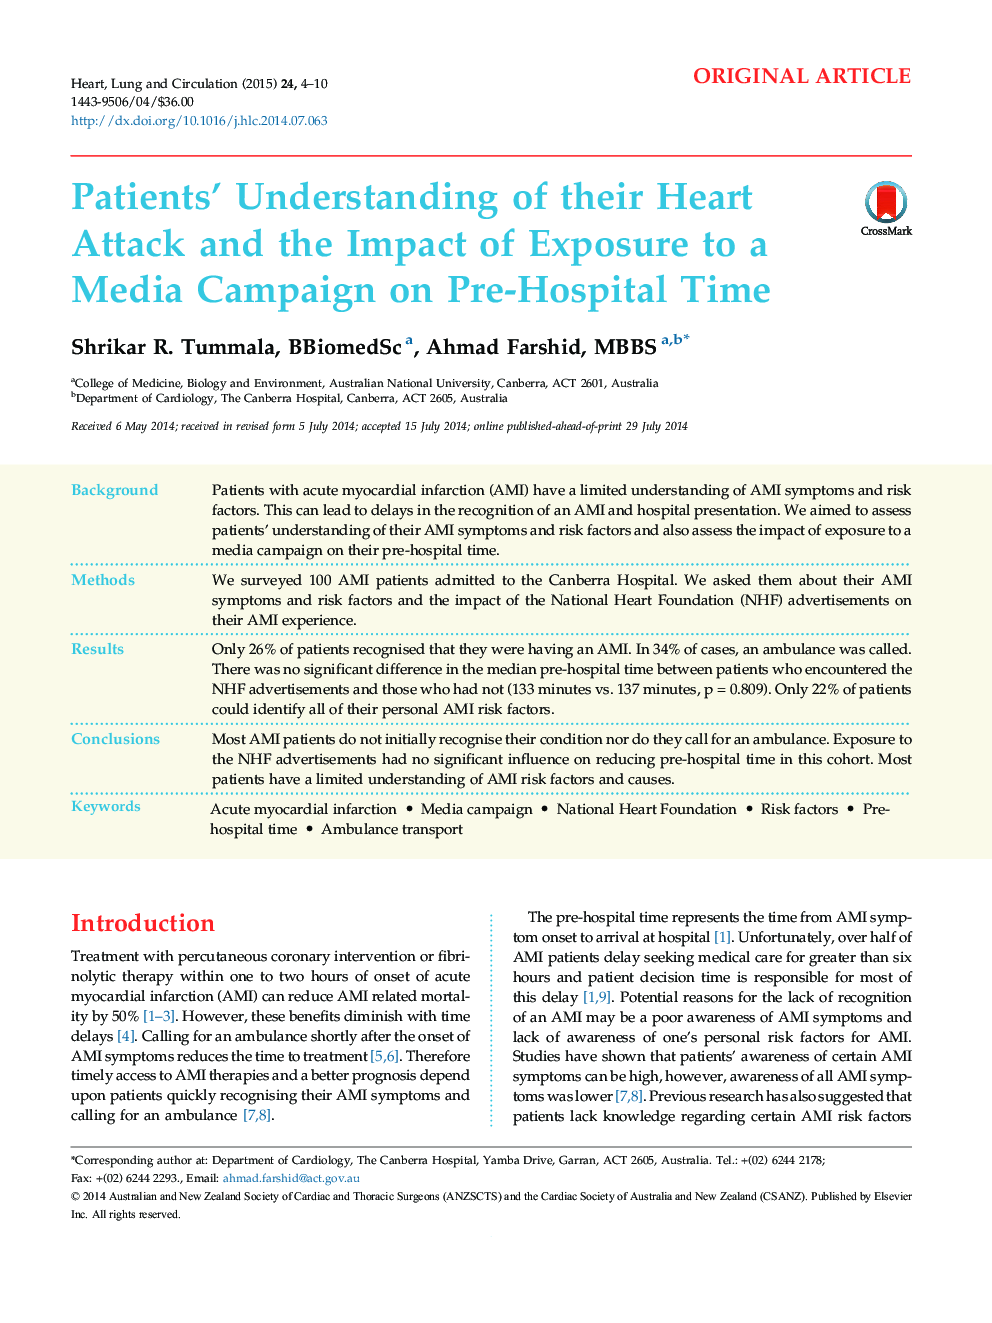 Patients’ Understanding of their Heart Attack and the Impact of Exposure to a Media Campaign on Pre-Hospital Time